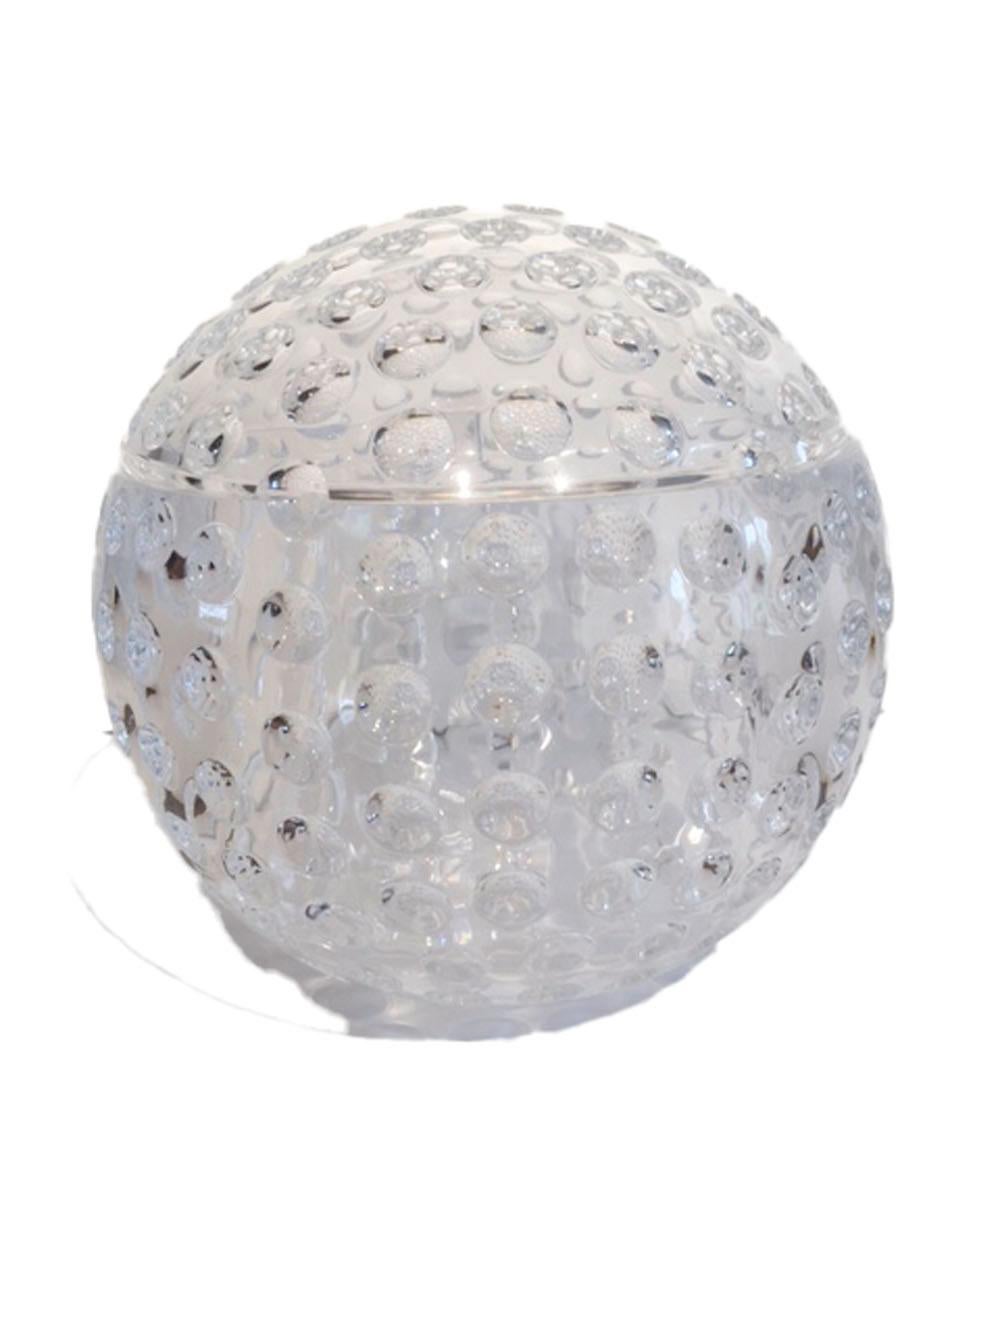 American Vintage Mid-Century Modern, Lucite Golf Ball Ice Bucket by Grainware For Sale